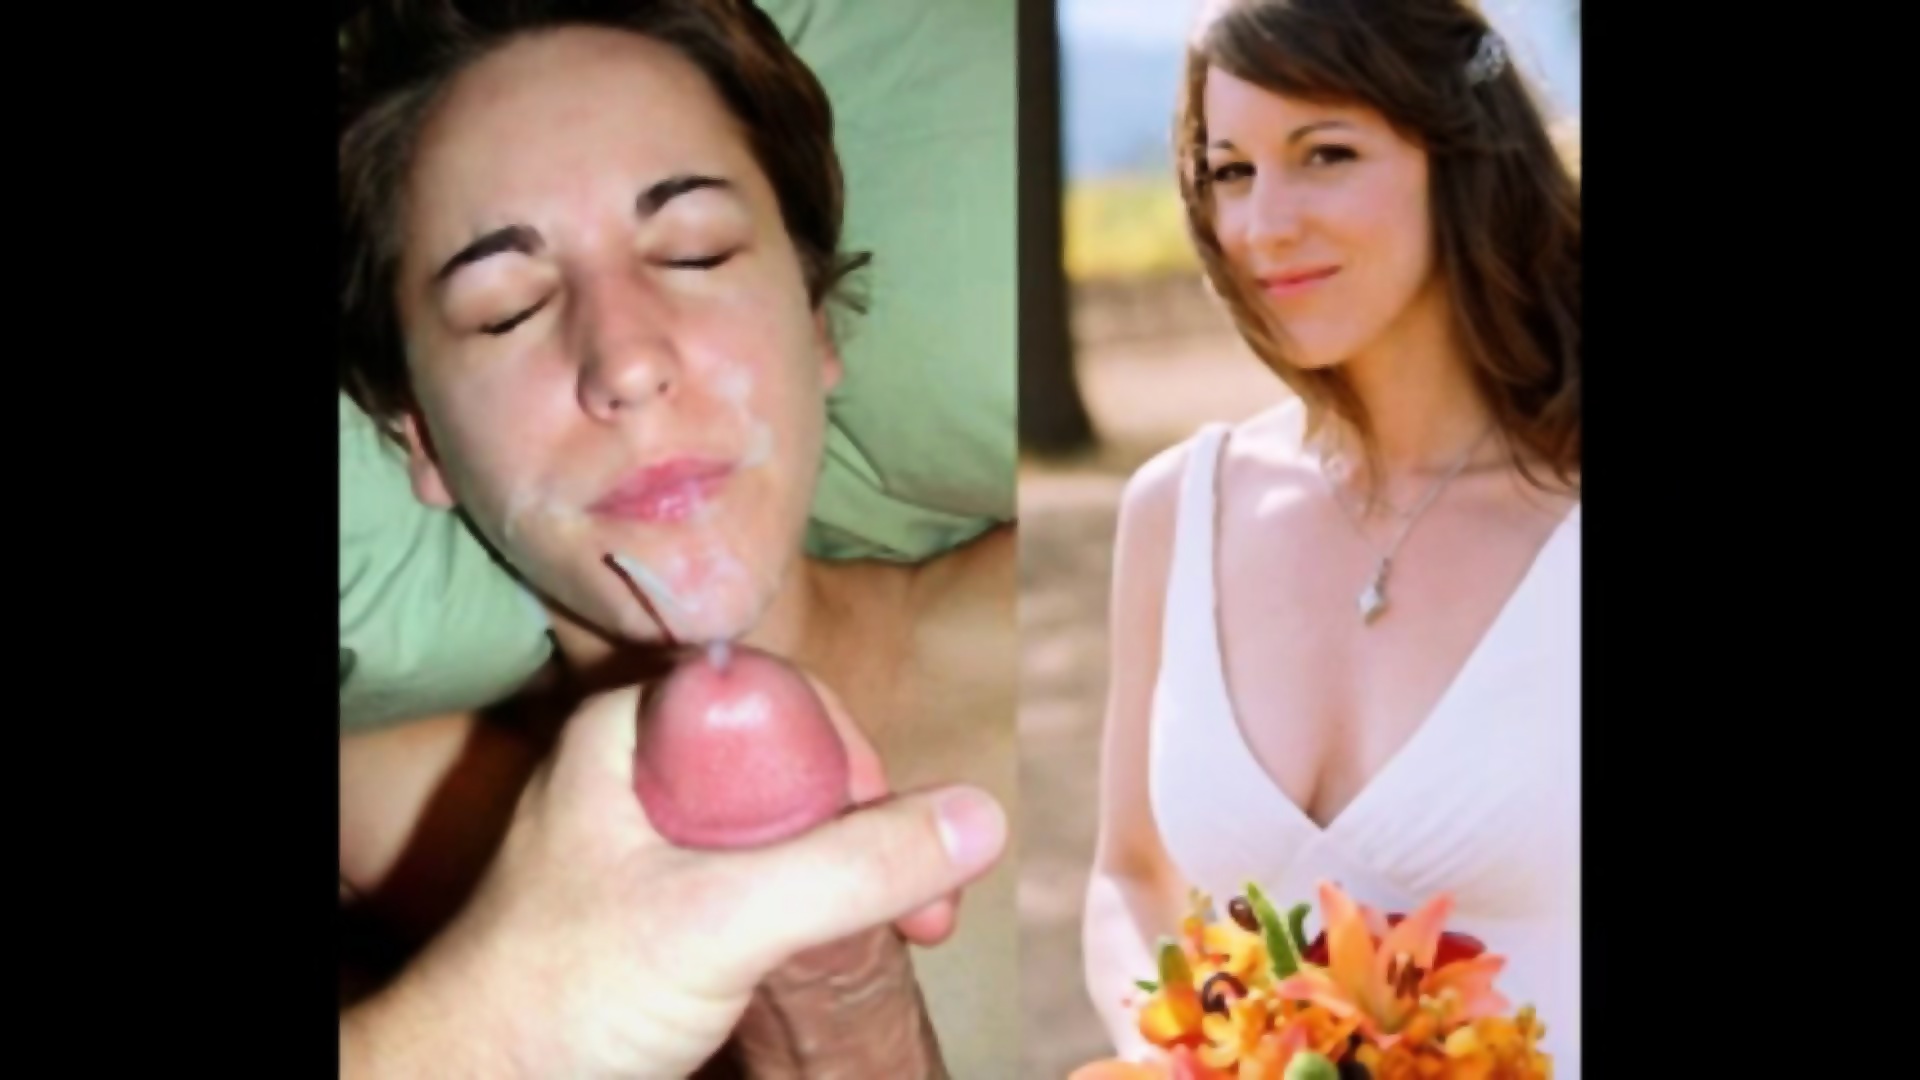 Brides Dressed, Undressed And Fucked Compilation photo